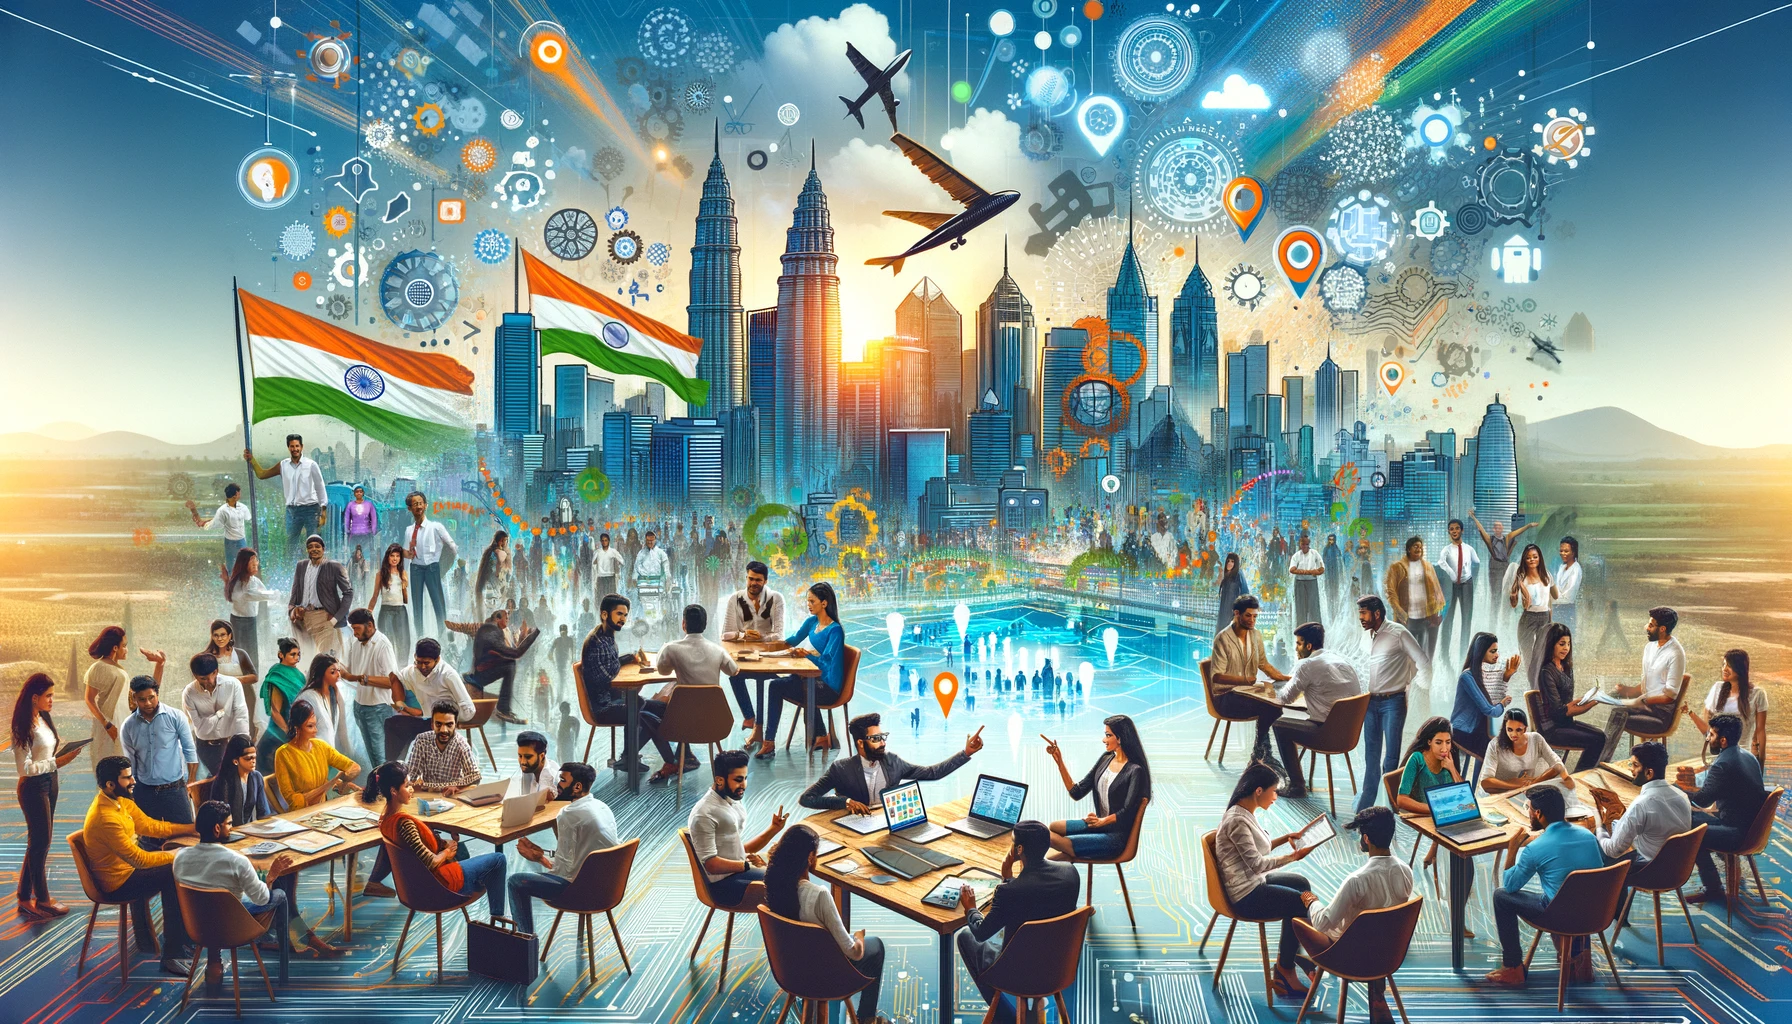 Featured image for “Startup India Scheme: An Overview”